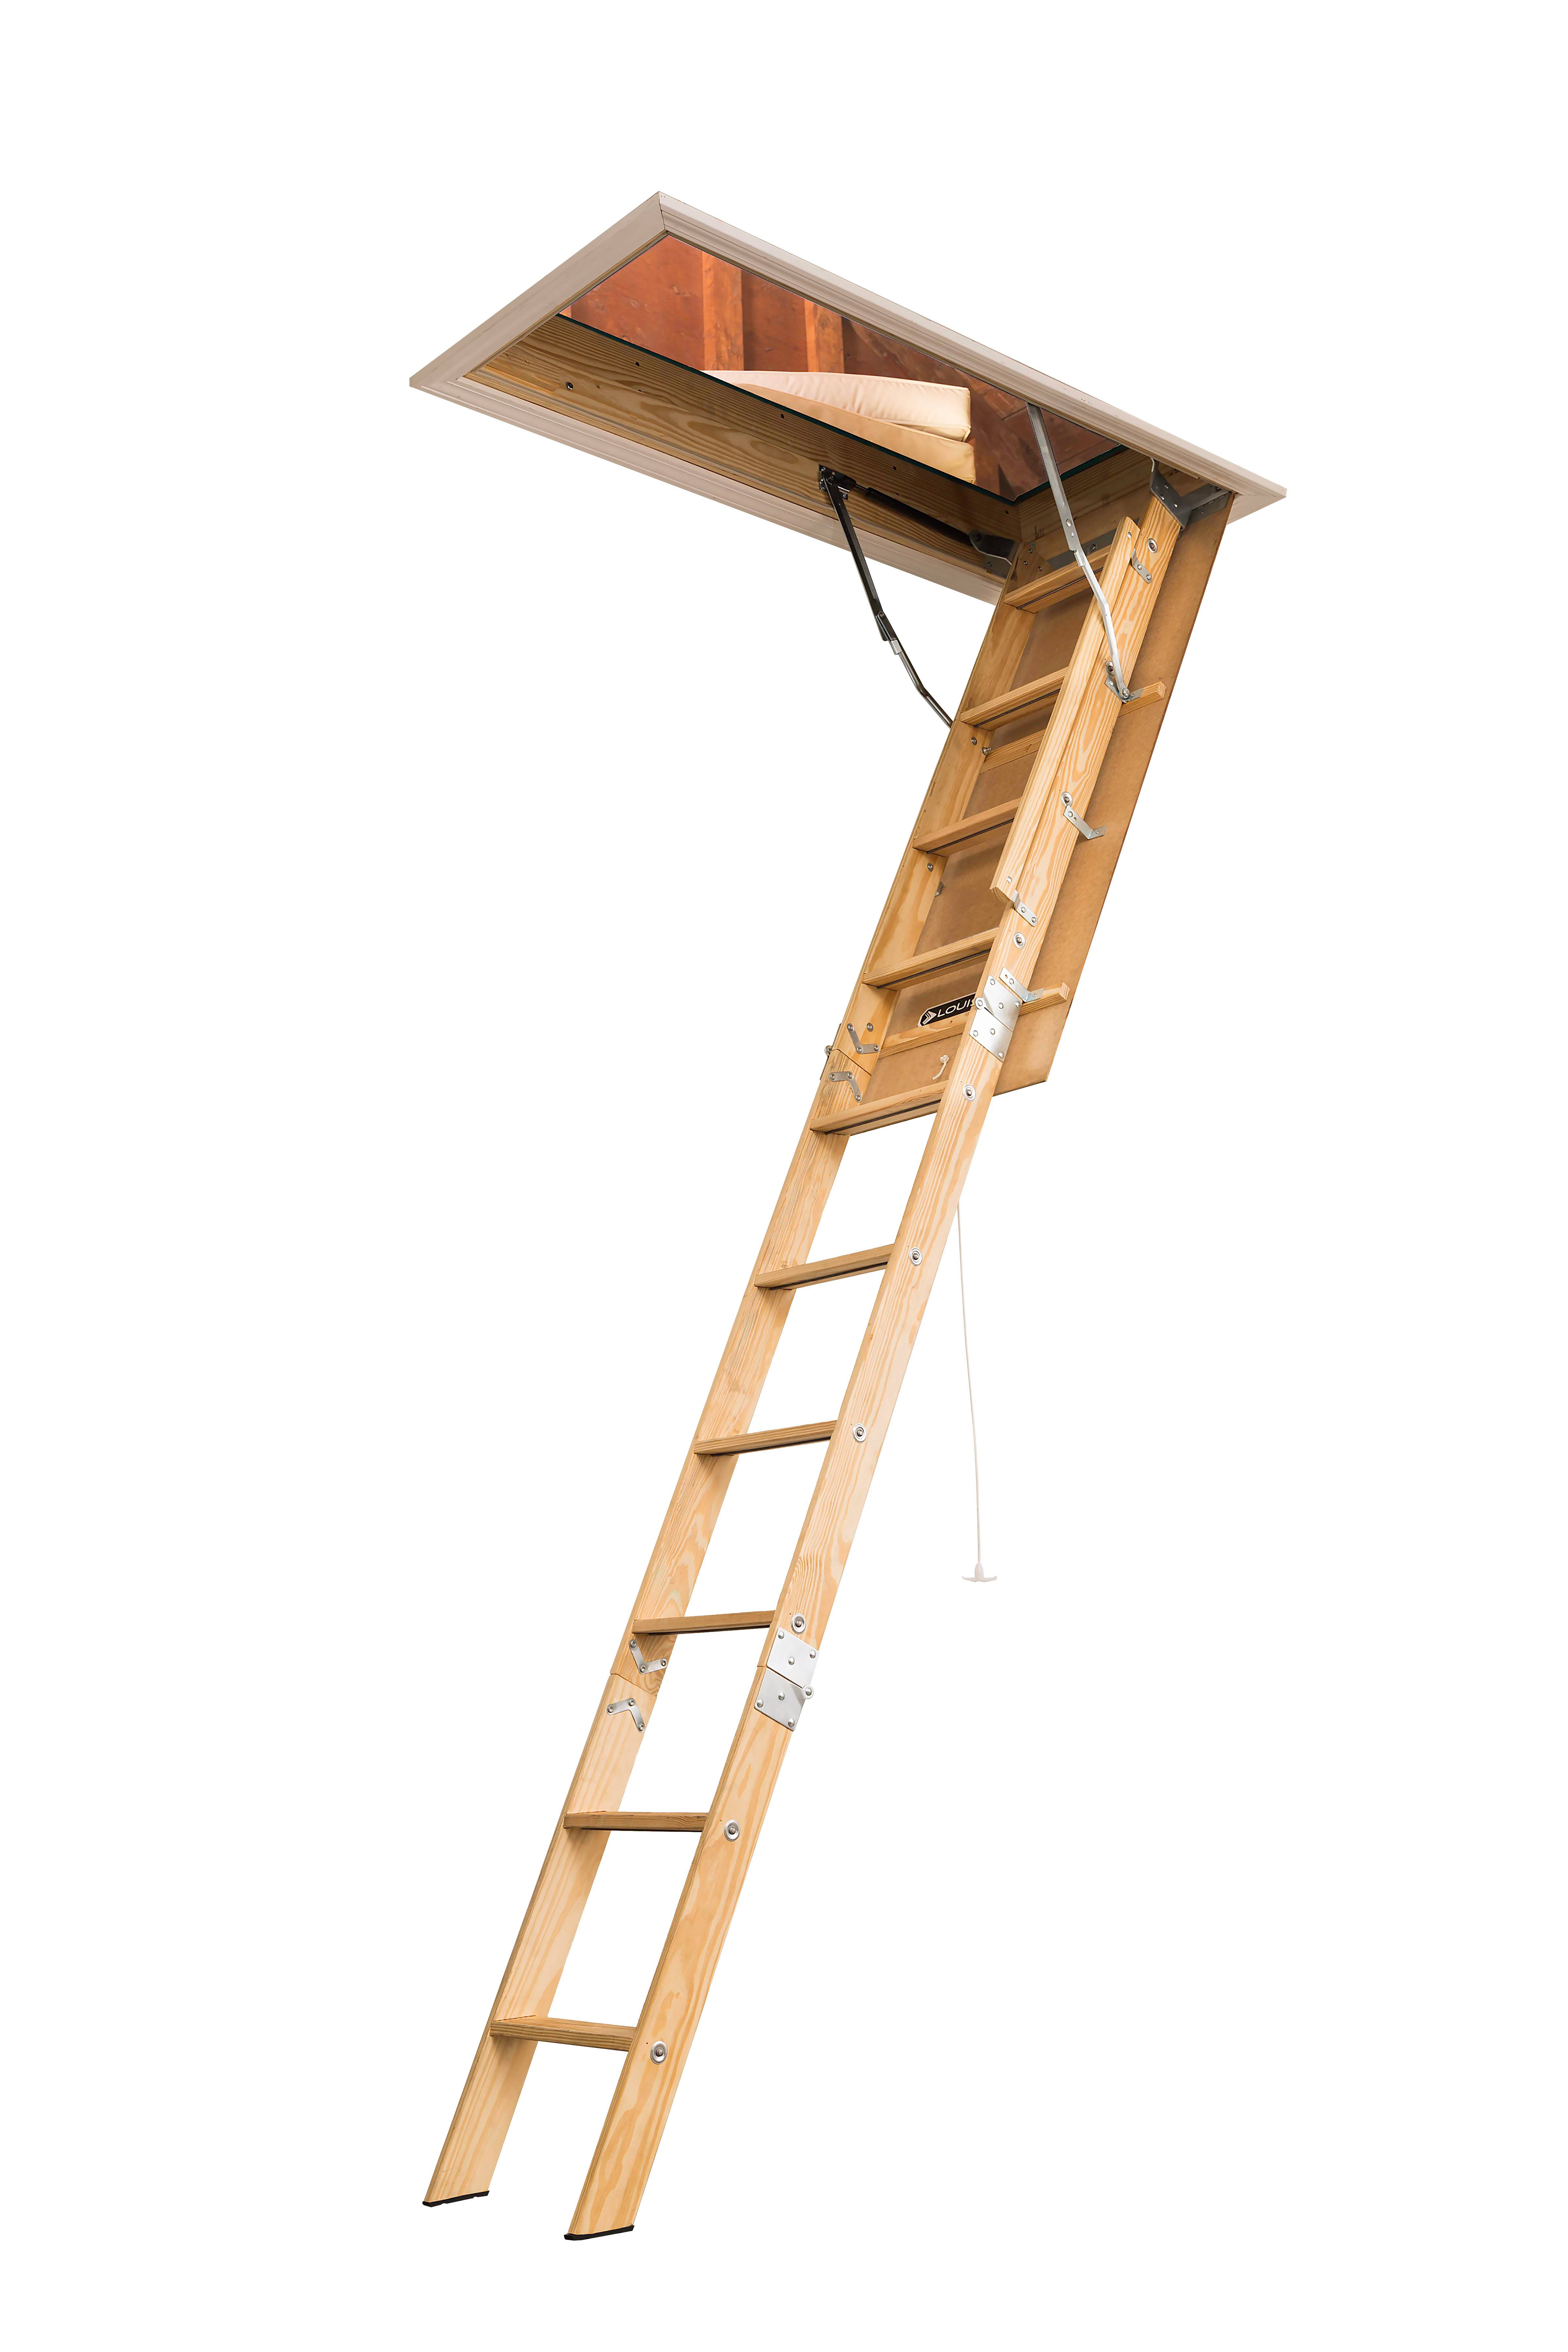 Shop Ladders at Lowes.com